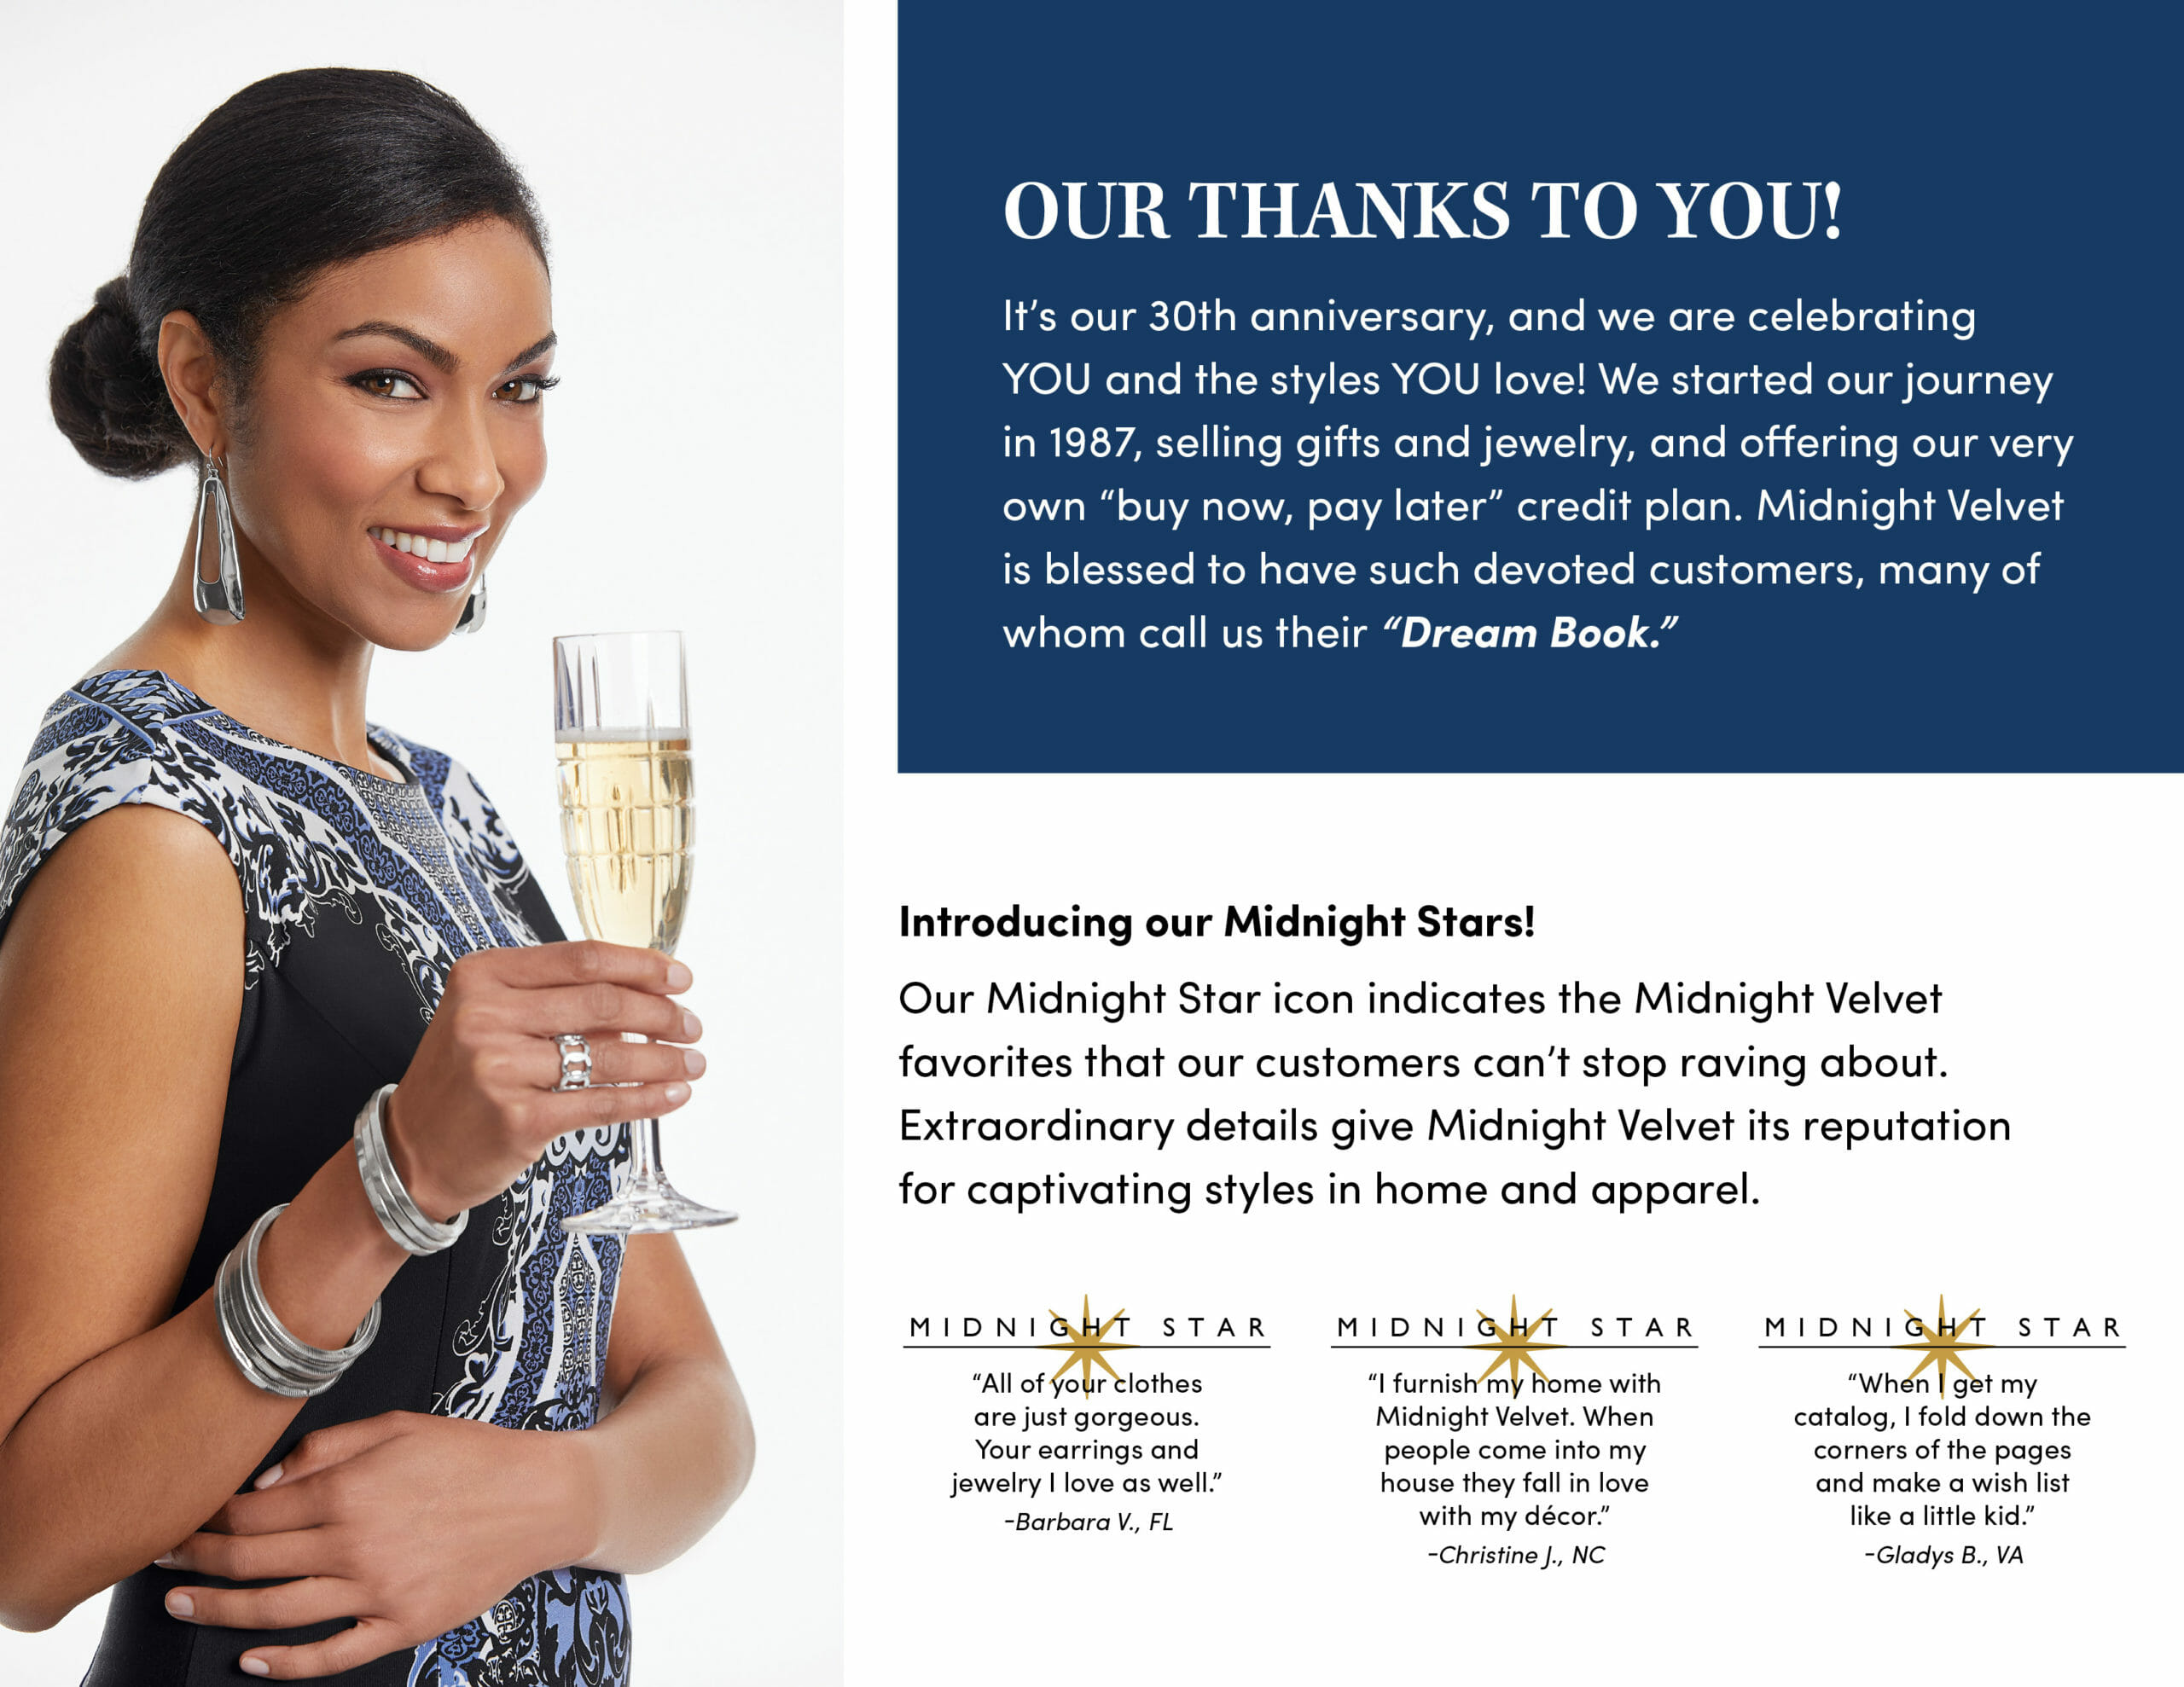 Our Thanks To You! Introducing our Midnight Stars! A smiling black woman in a navy dress, holding a filled champagne glass.